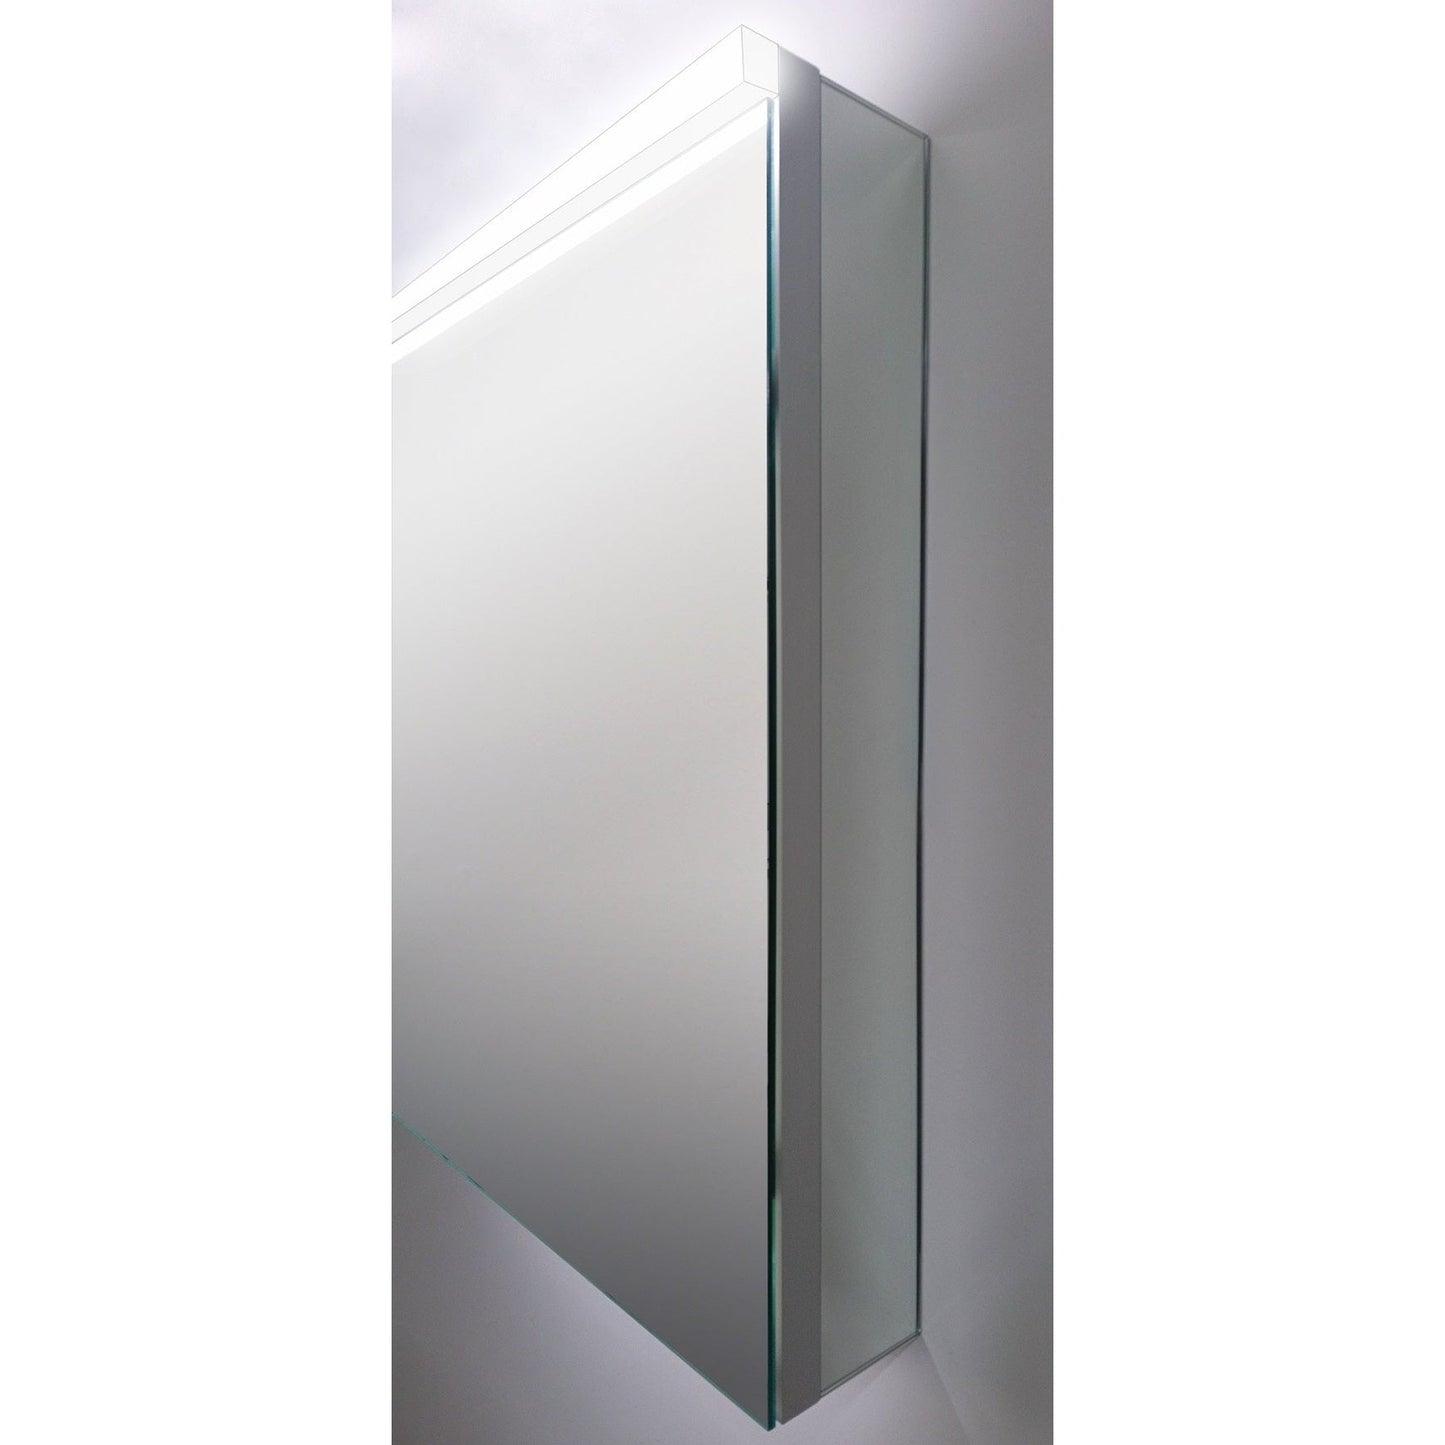 Sidler Xamo 36" x 30" 4000K Double Mirror Door Medicine Cabinet With Built-in GFCI outlet and Night Light Function